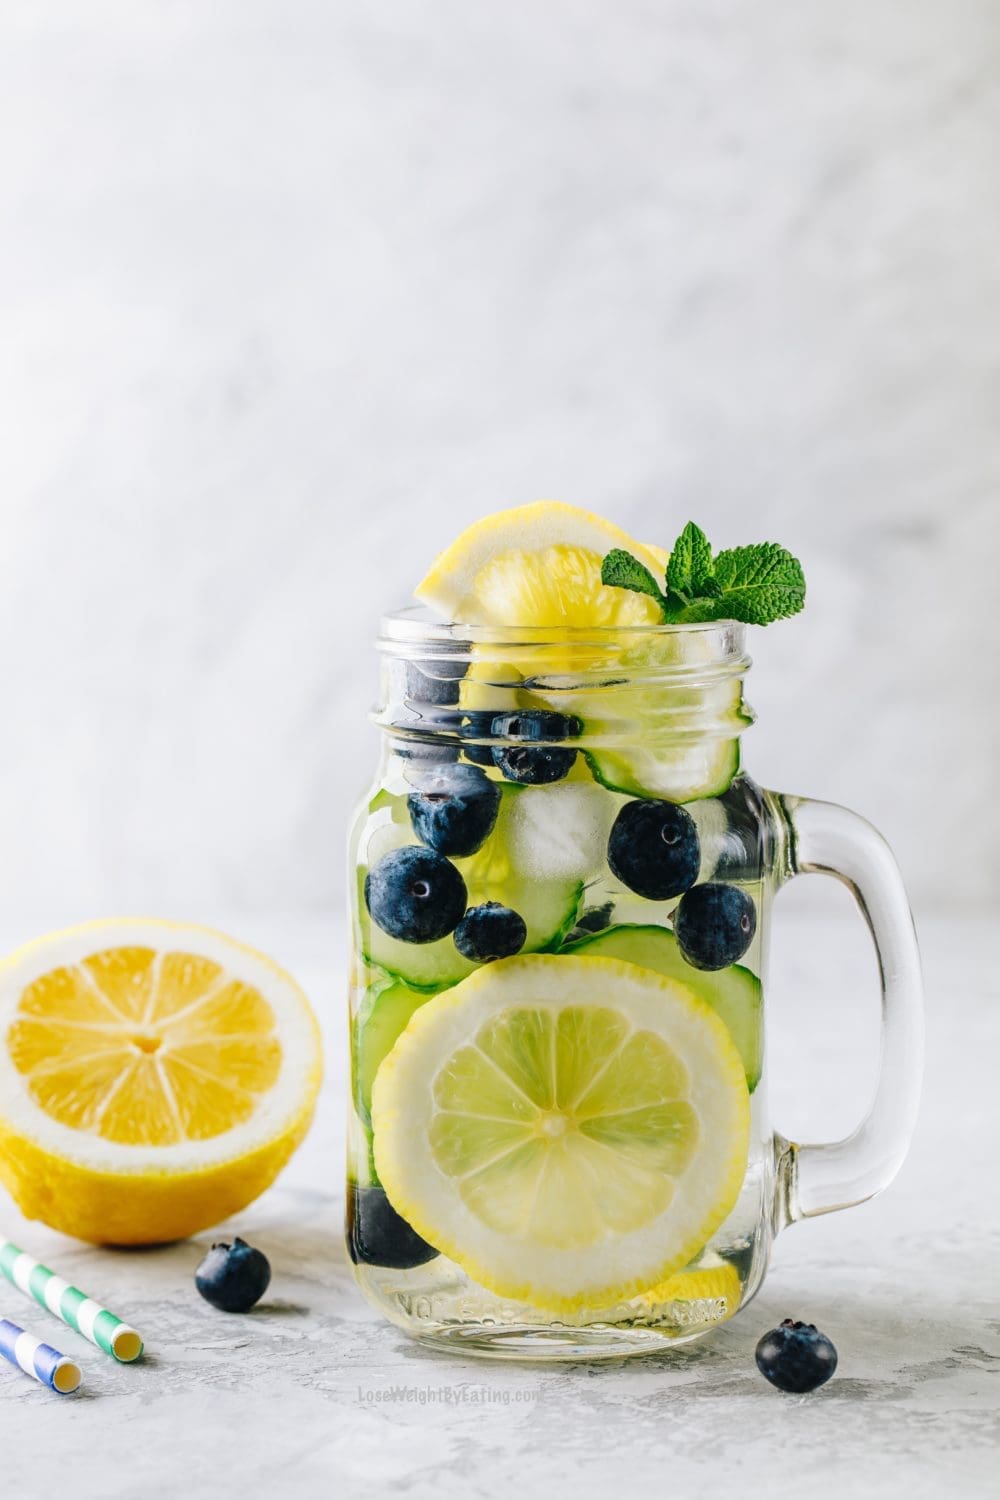 10 Detox Cucumber Water Recipes for Weight Loss
